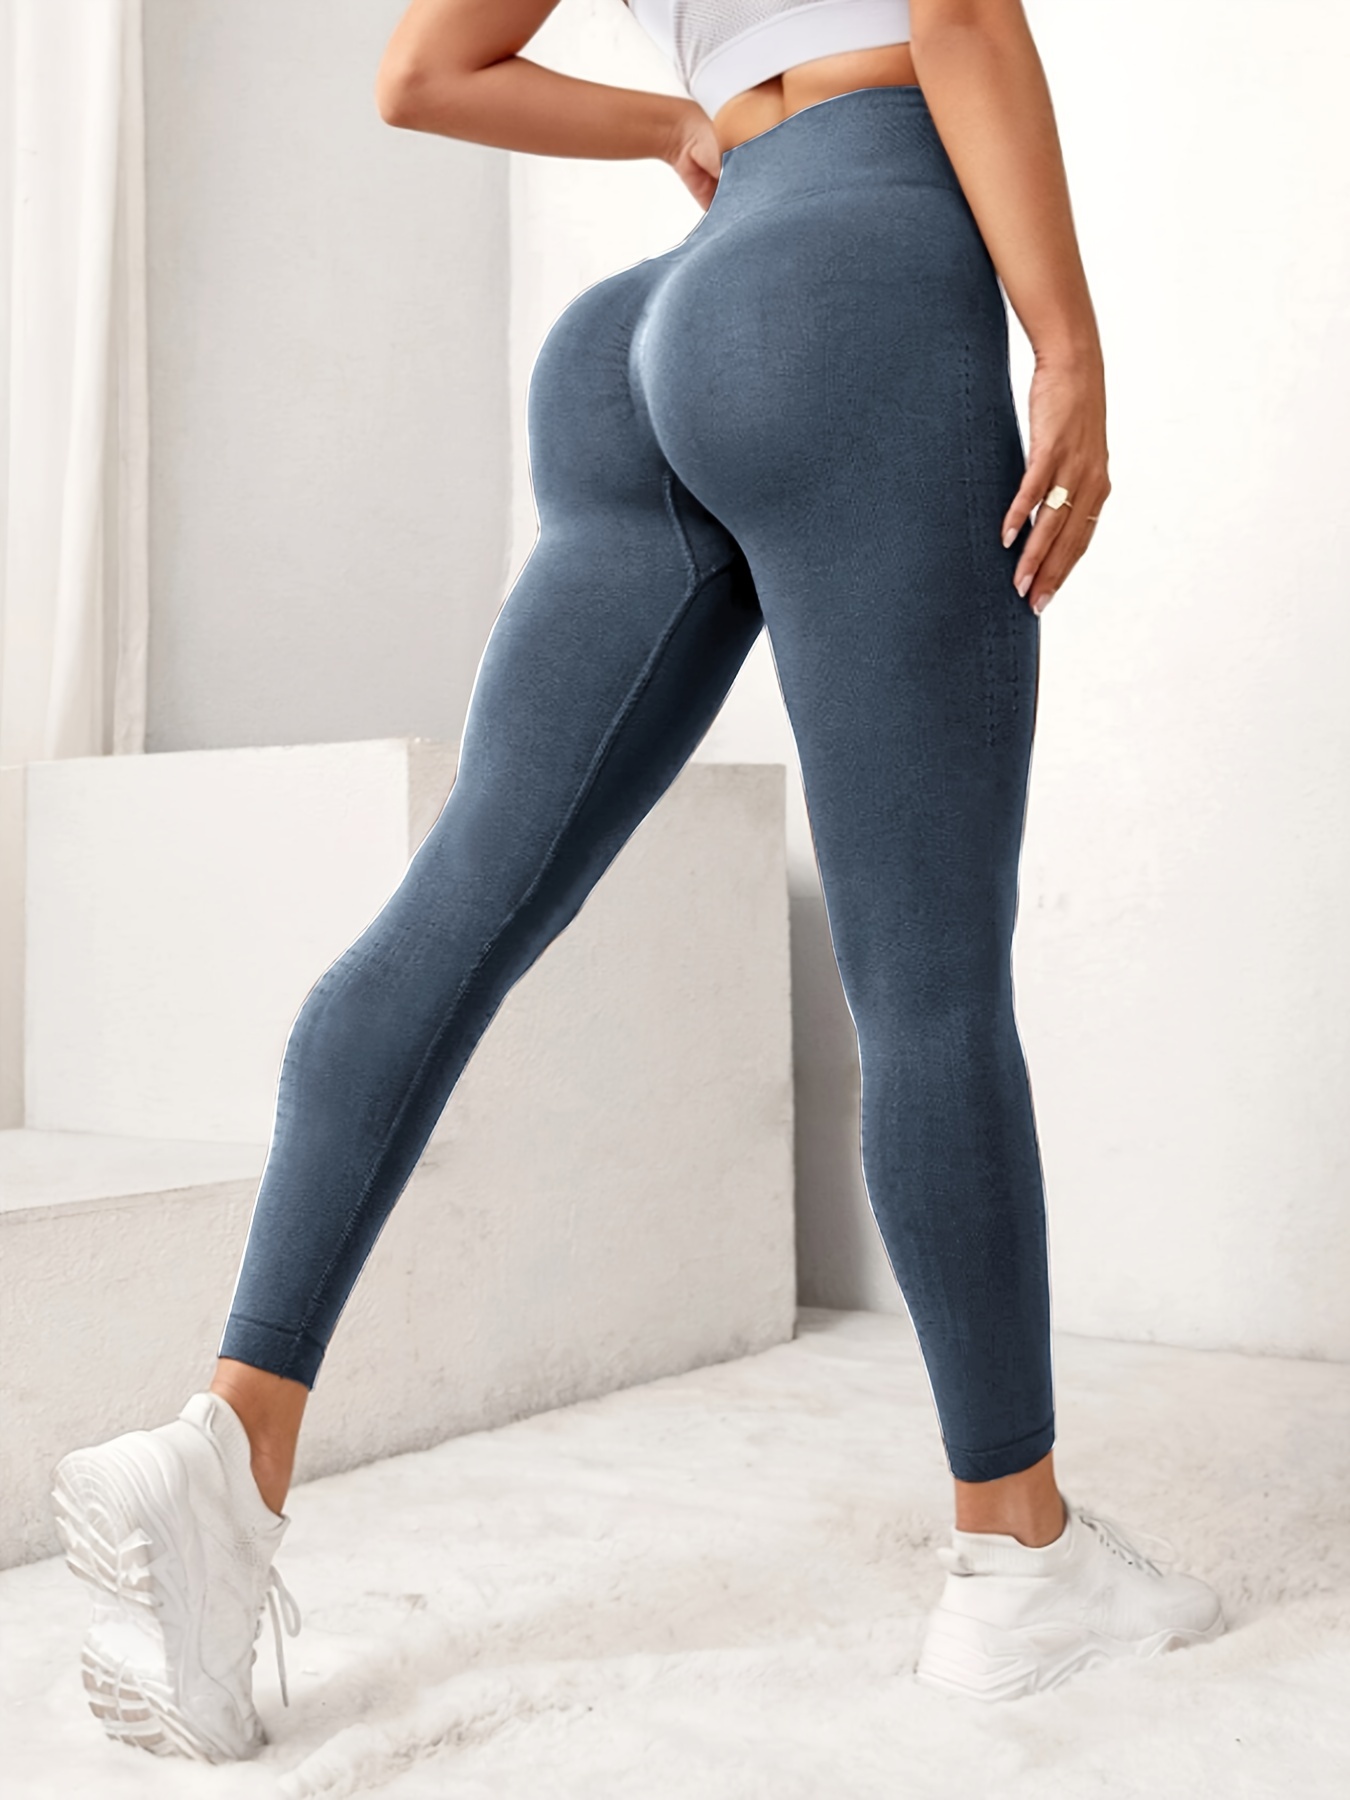 SHINBENE Naked Feel Scrunchy Booty High Waisted Workout Leggings High Waist  Stretchy Fabric For Womens Fitness Workout Asia Size 201202 From Mu04,  $21.1